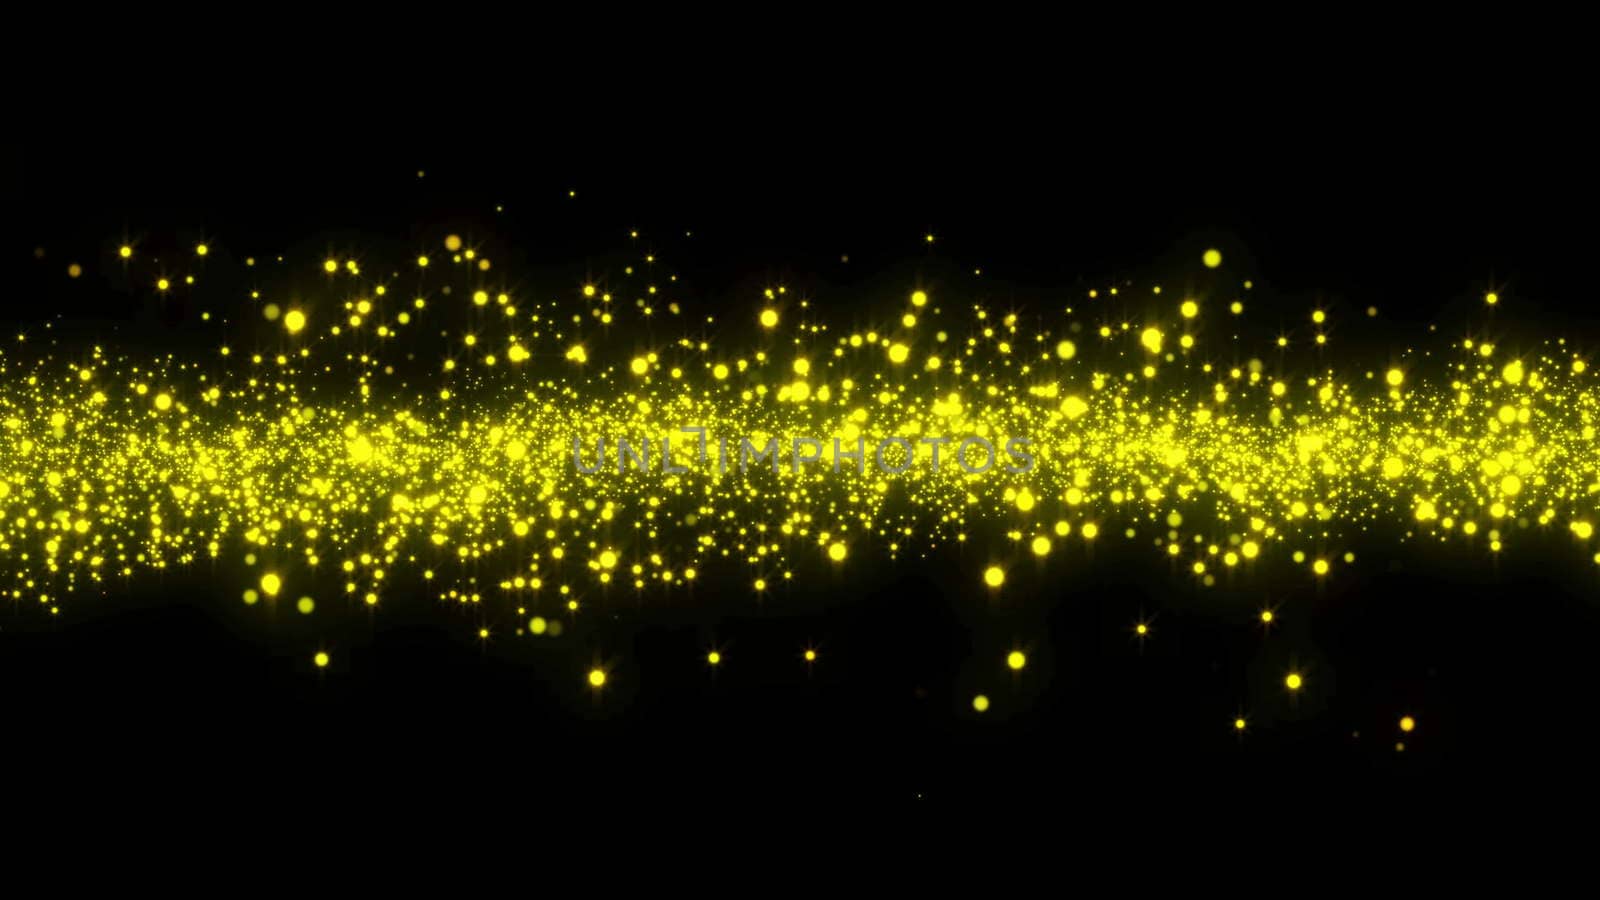 Particle background. Glow gold element with black background